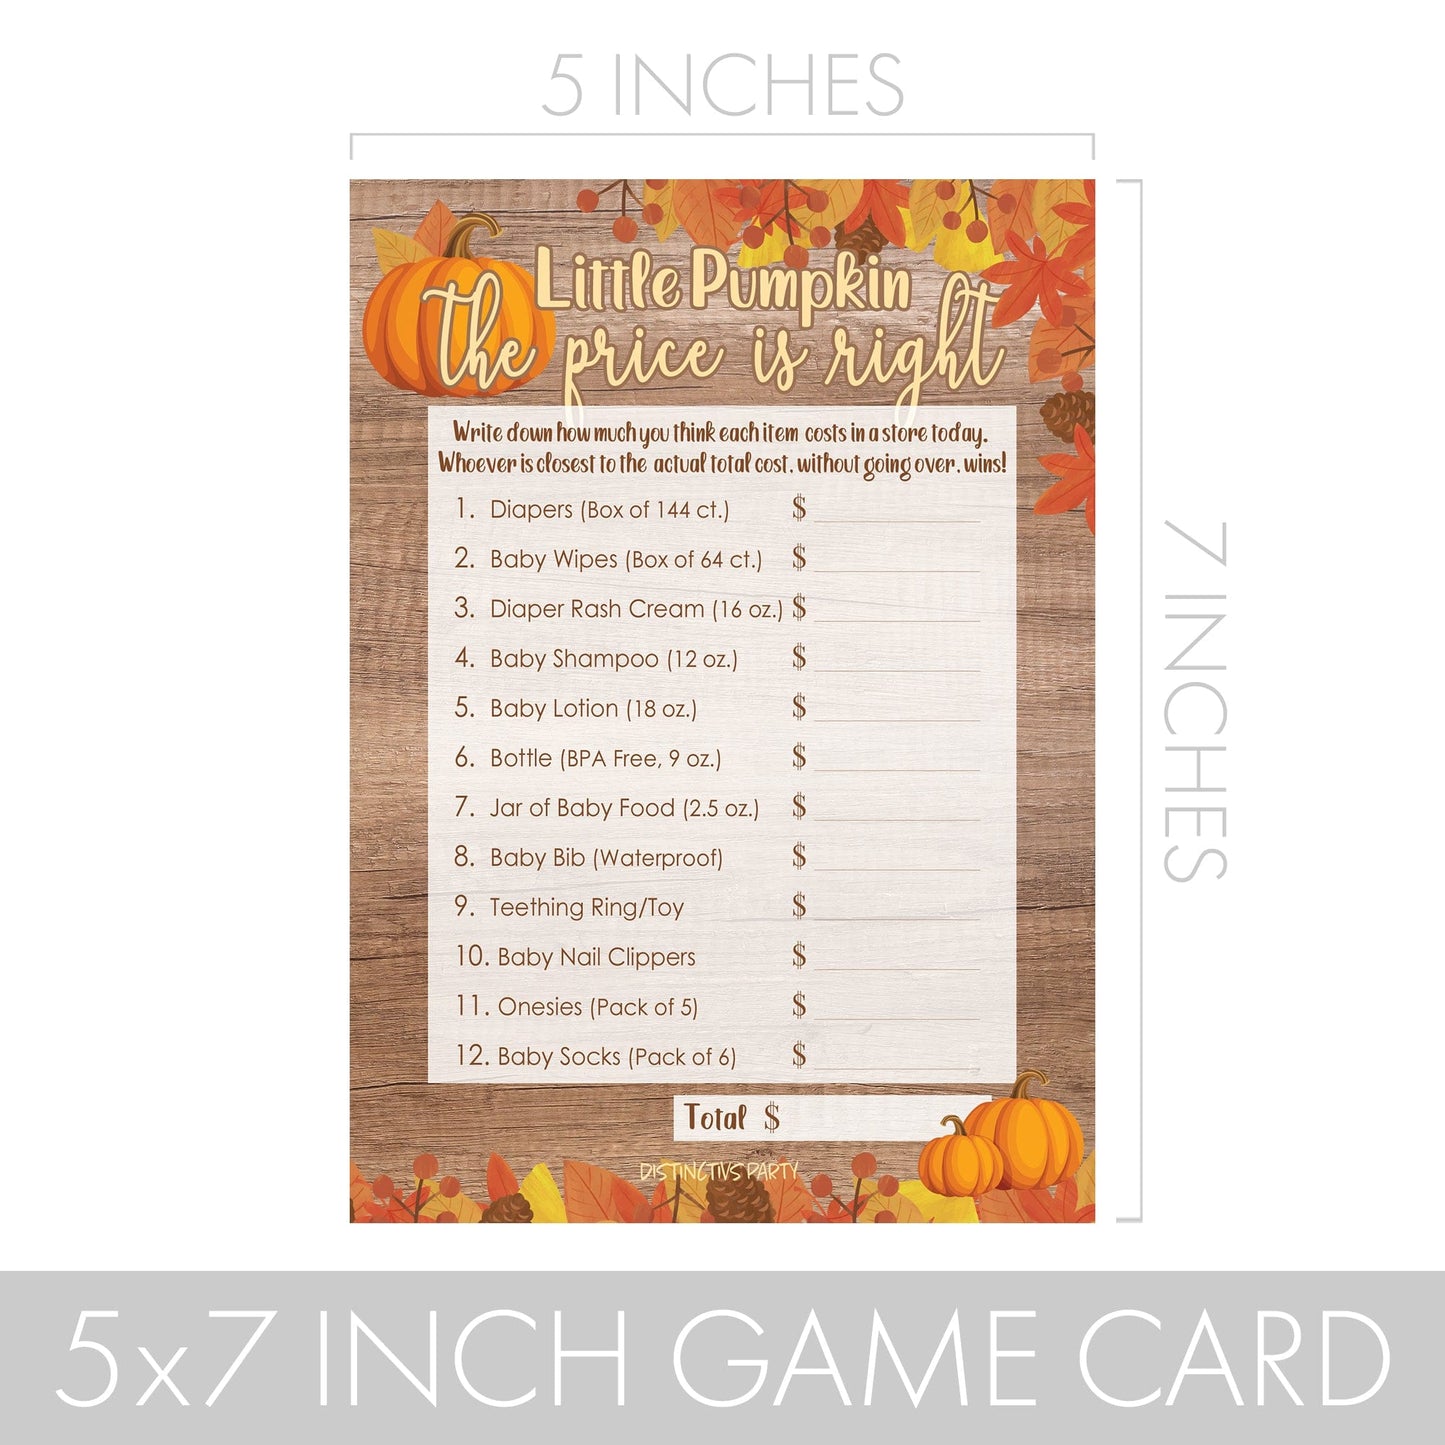 lil fally cards under rustic pumpkins rights card party decorations diapers baby lotion grocery store groceries game card due date pampkin fall games our little pumpkin our lil pumpkin our lil punkin